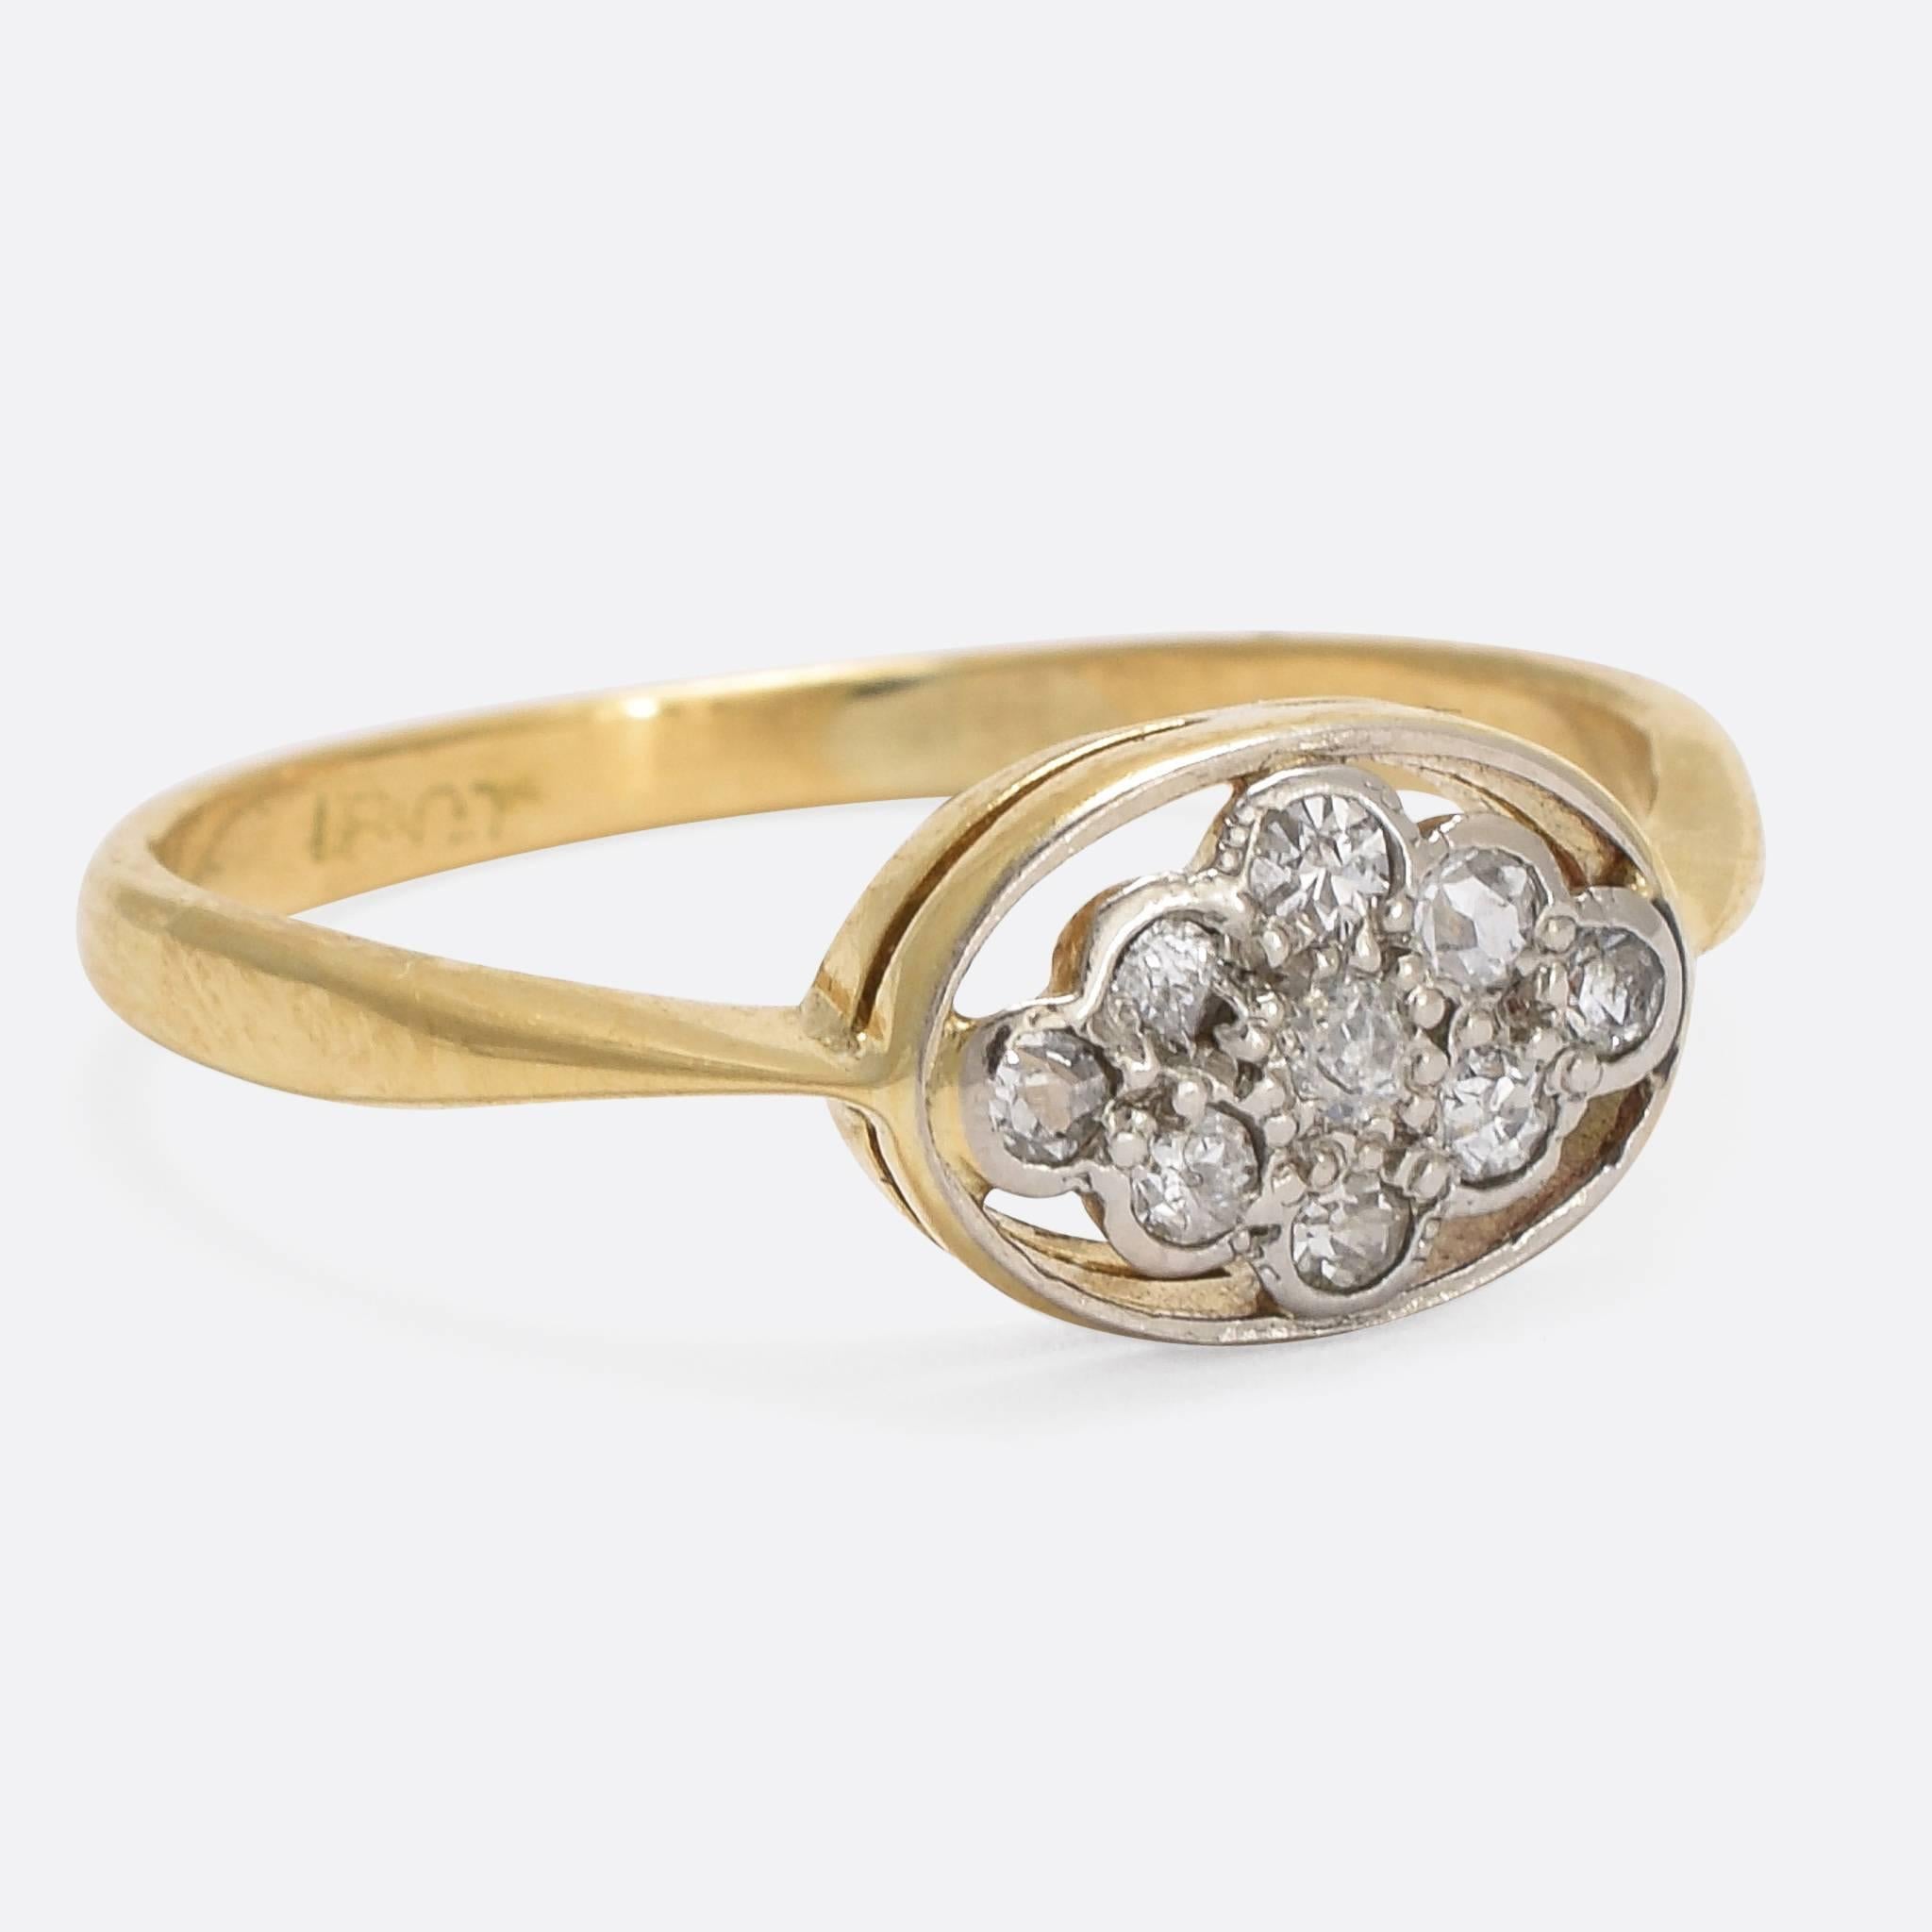 This pretty 1920s cluster ring is set with nine sparkling white diamonds, surrounded by an oval platinum halo. The delicate head is complemented by elegant pinched shoulders. Modelled in 18k yellow gold with platinum settings. Ring Size: 6.